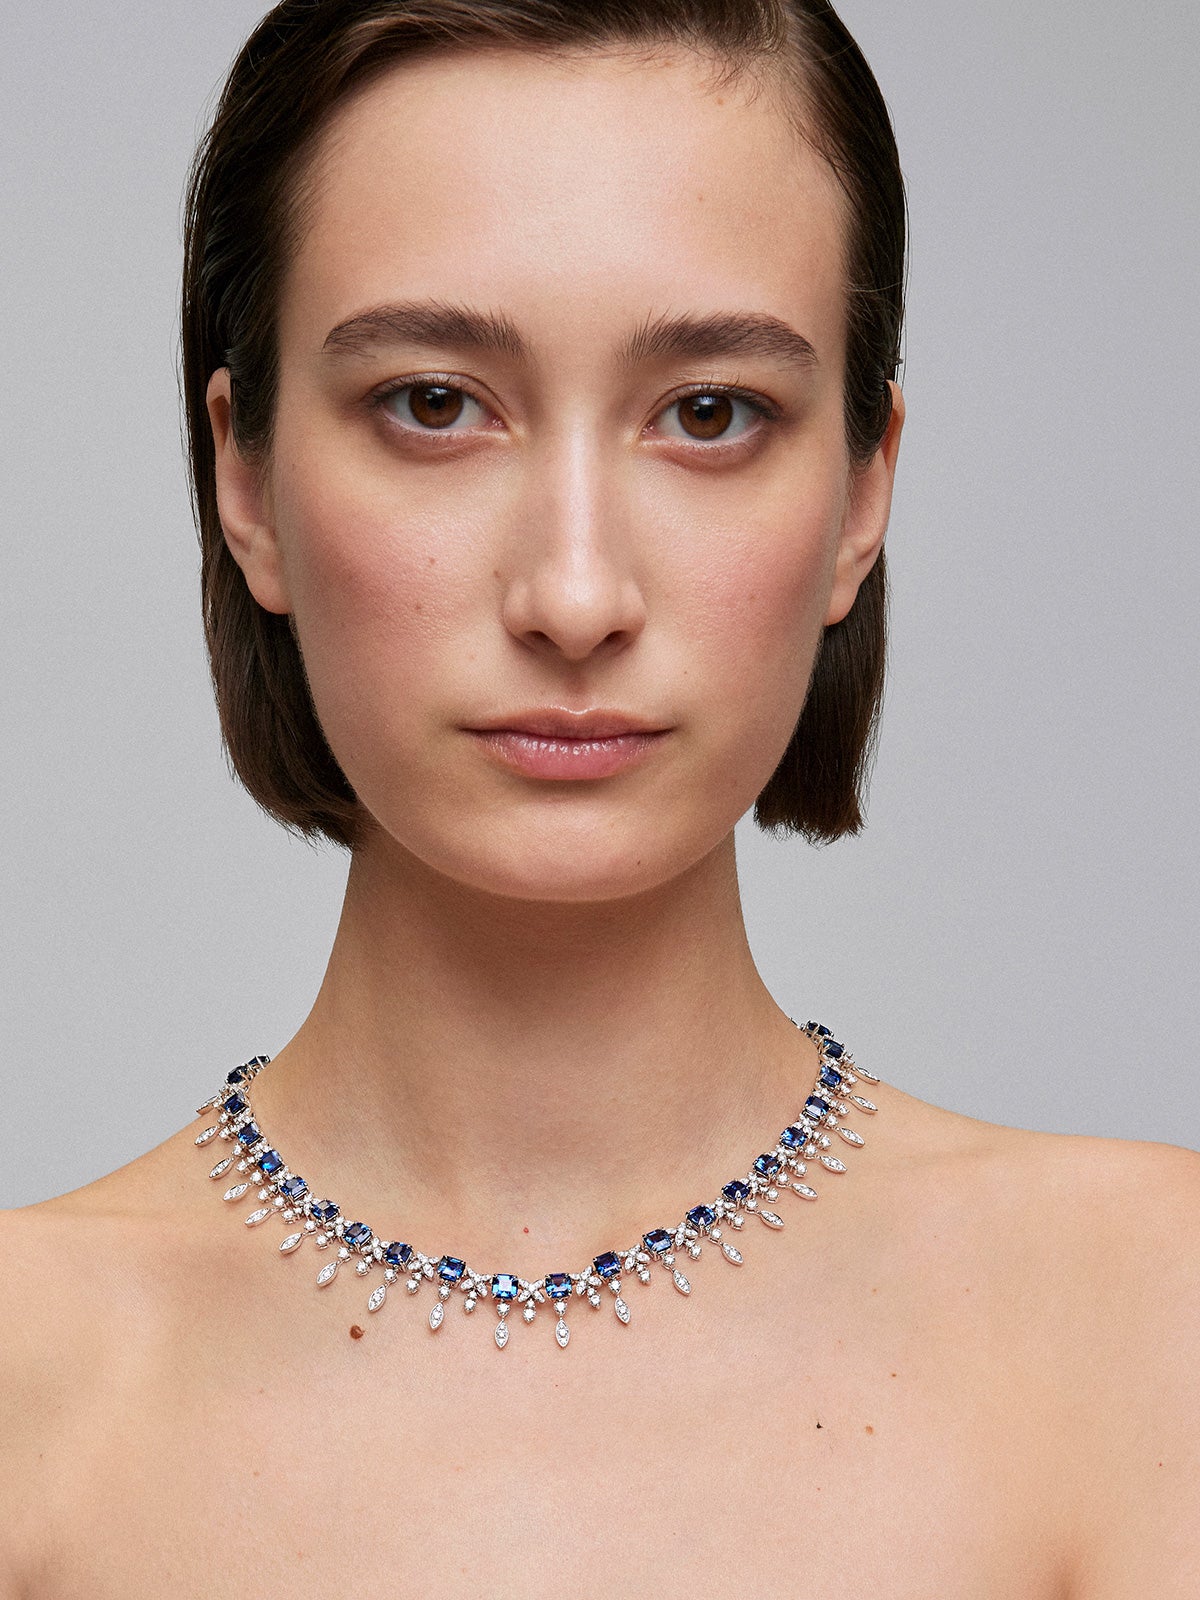 18K white gold necklace with 34 octagonal-cut blue sapphires with a total of 40.98 cts and 460 brilliant-cut diamonds with a total of 9.48 cts